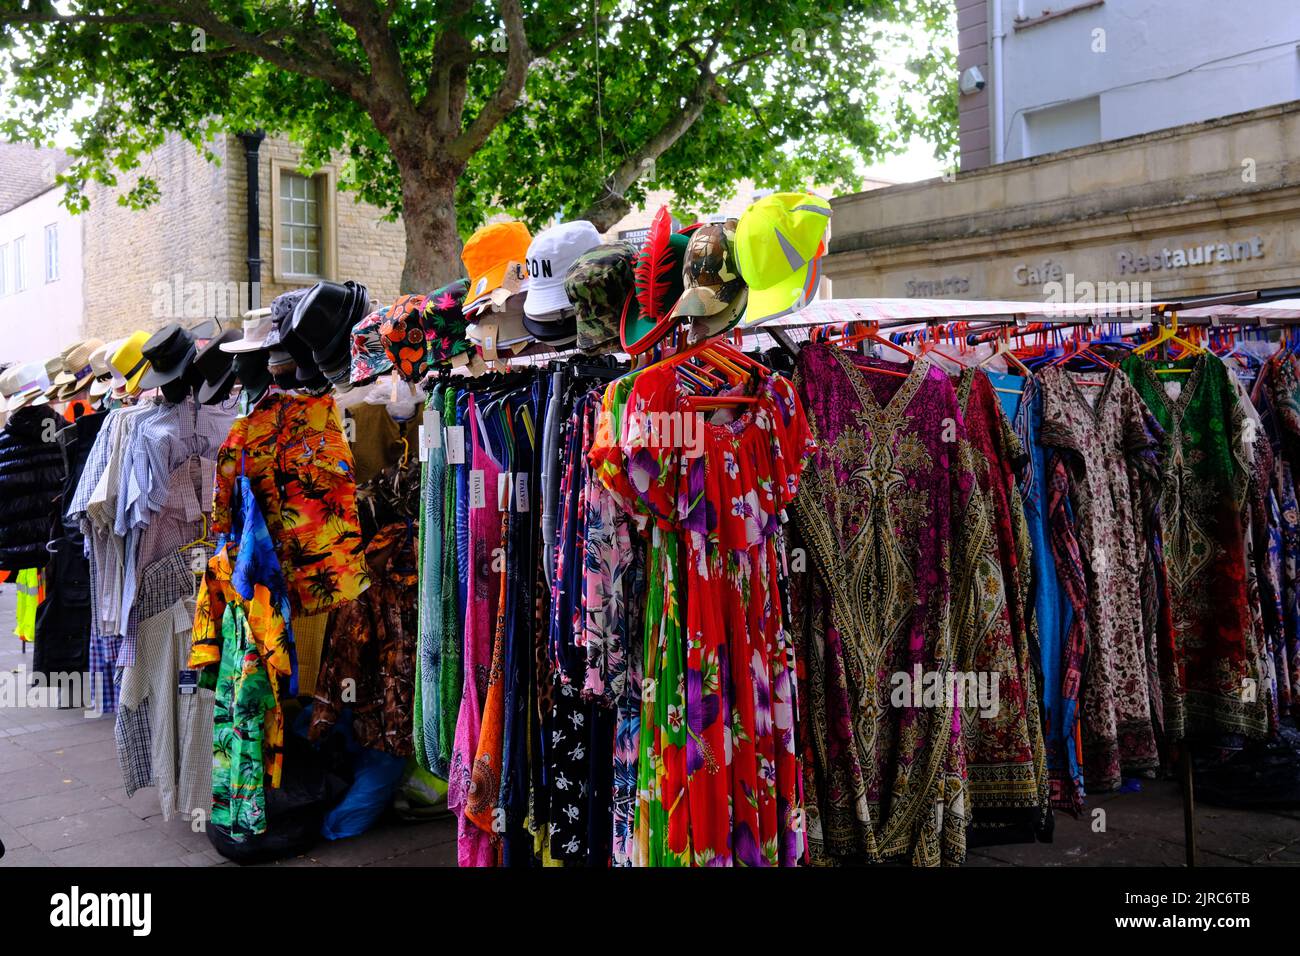 Market clothes stall, bright and colourful, Witney, Oxfordshire Stock Photo